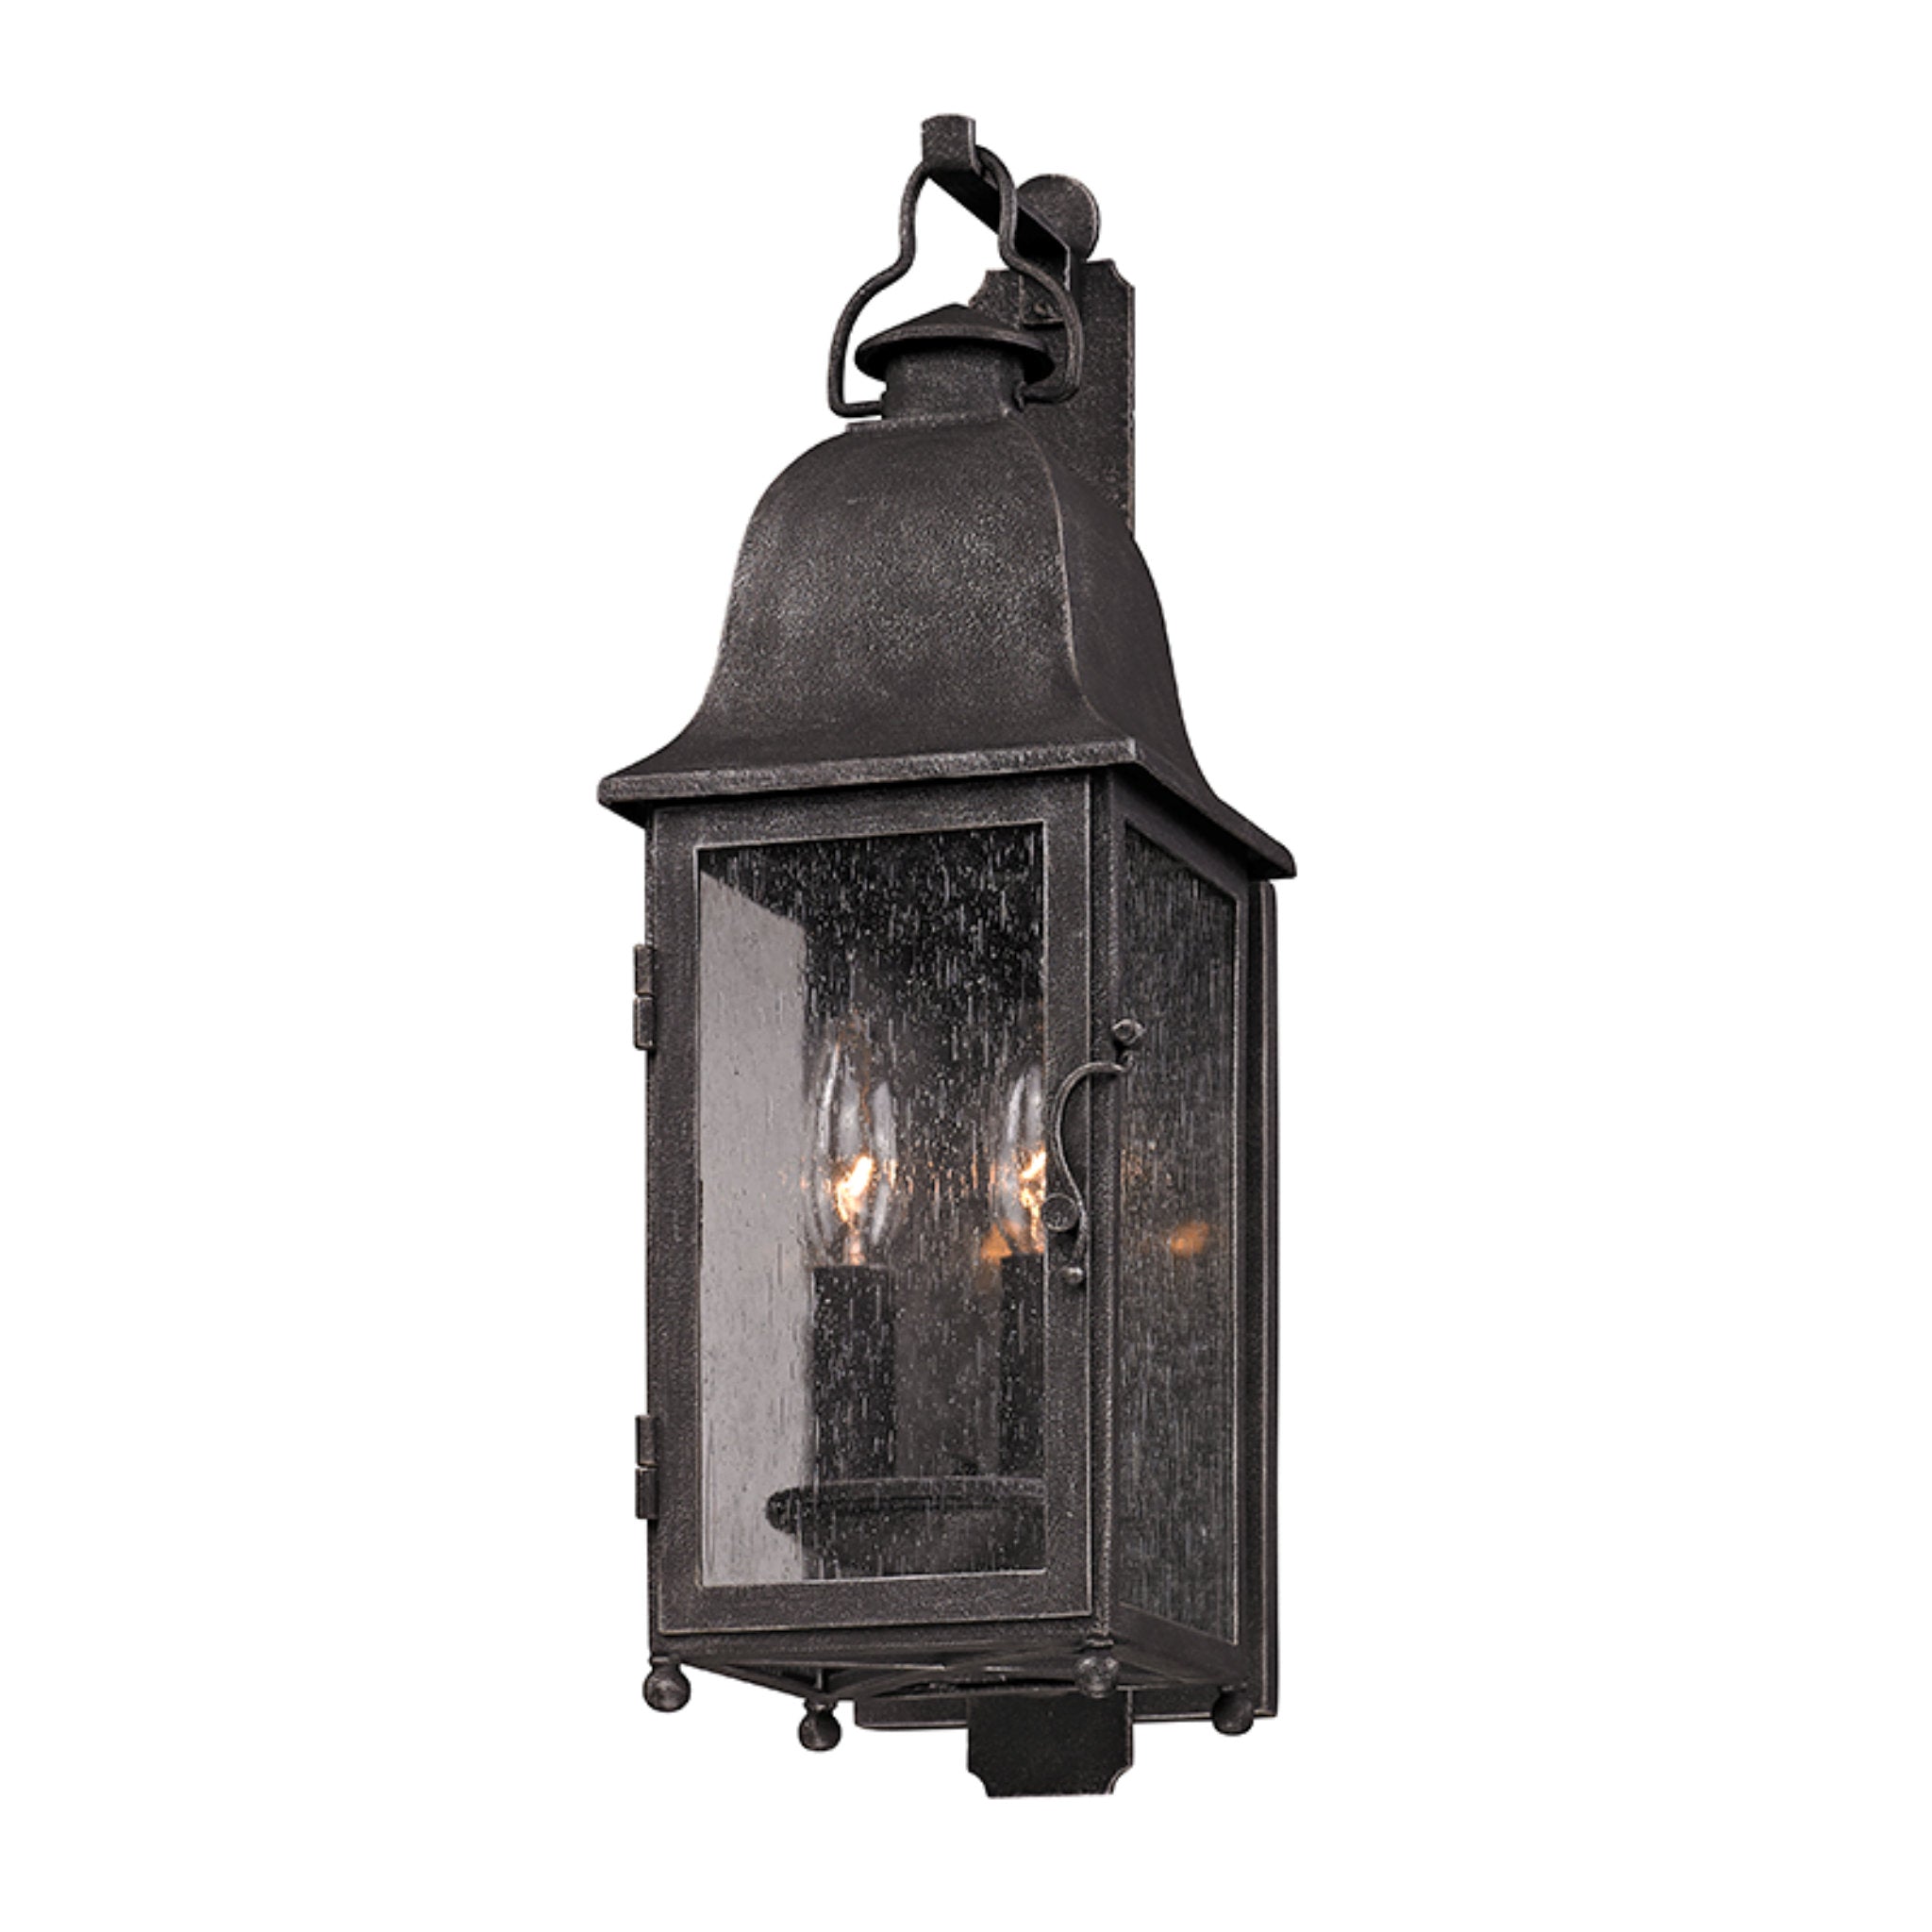 Larchmont 2 Light Wall Sconce in Vintage Bronze